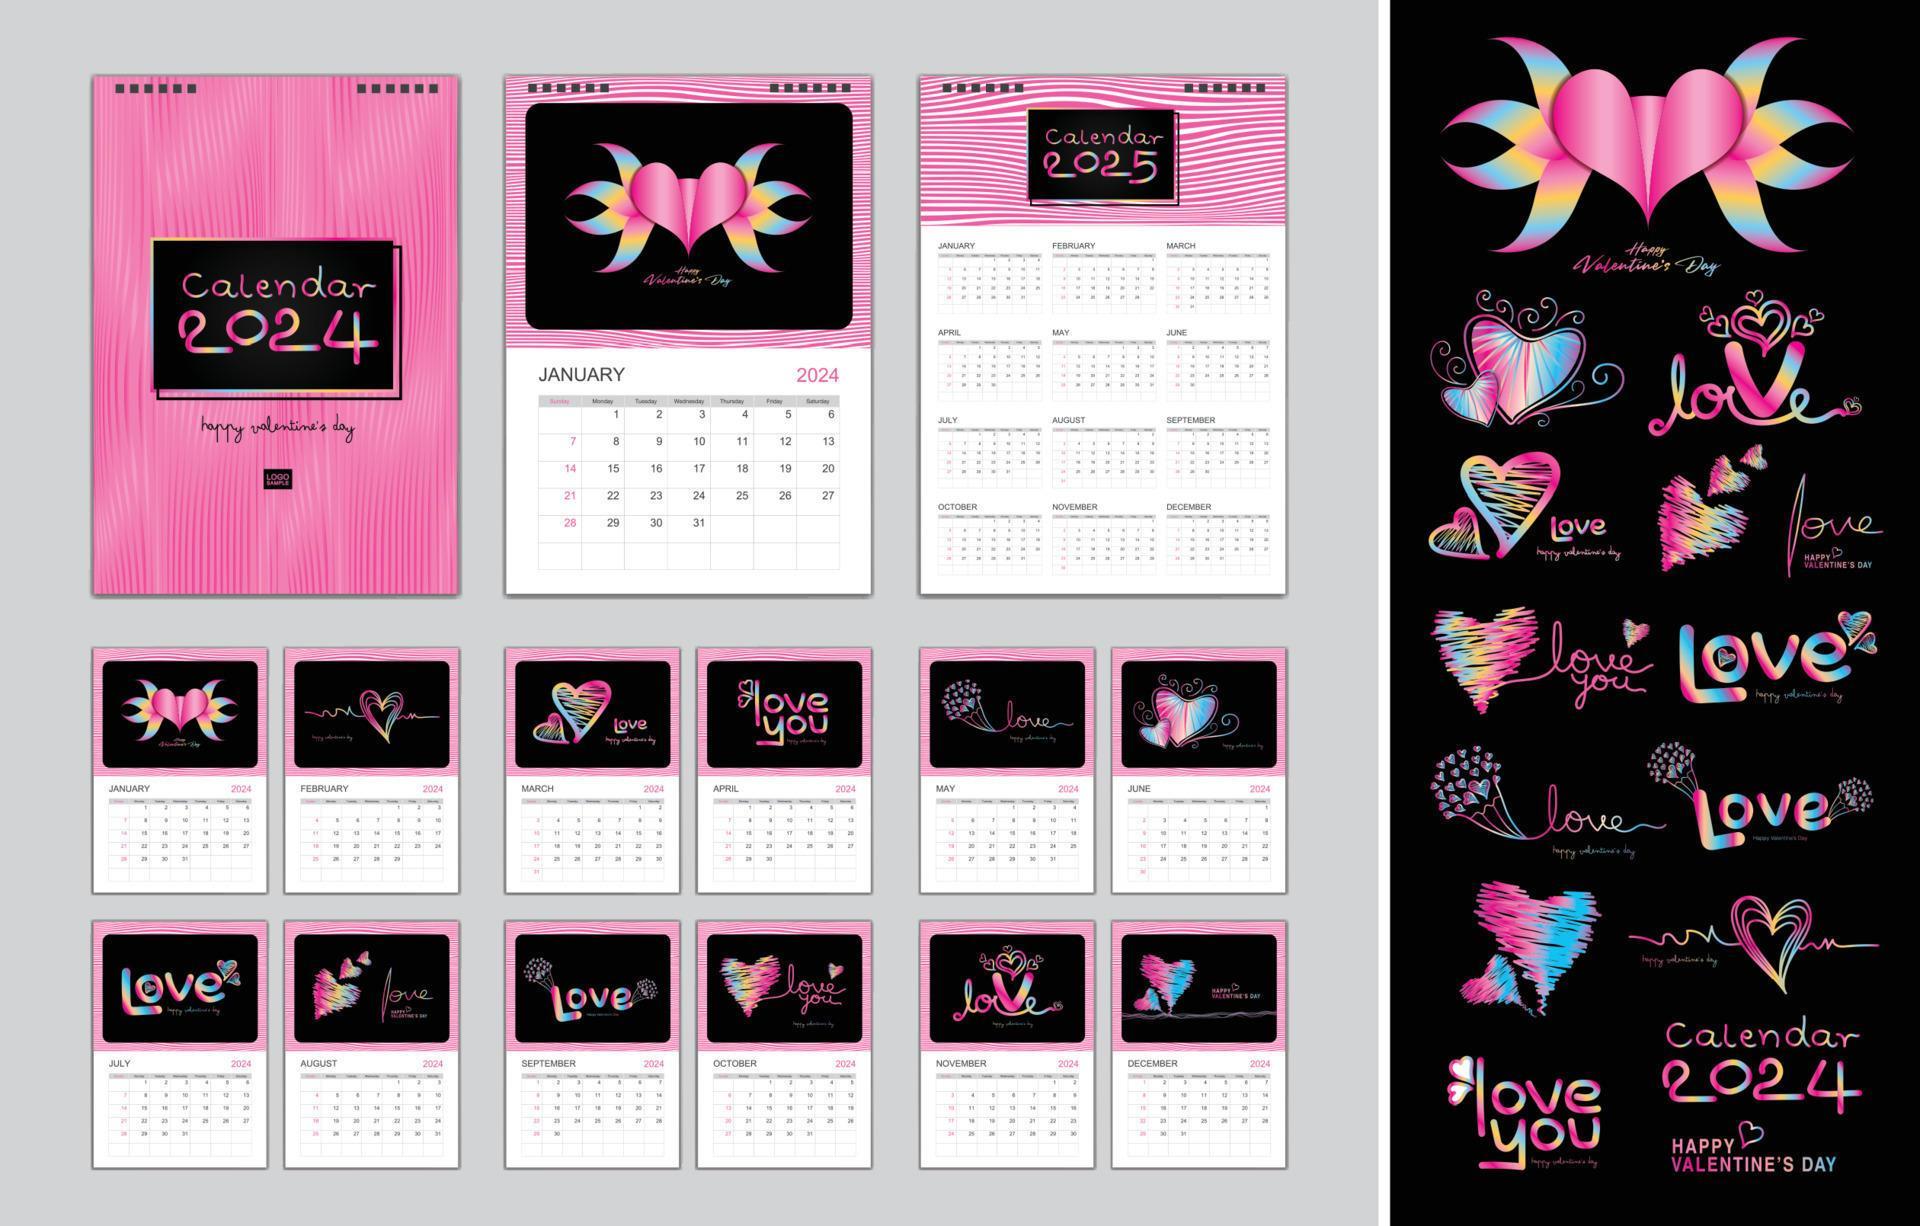 calendar-2024-template-for-holiday-happy-valentine-s-day-concept-desk